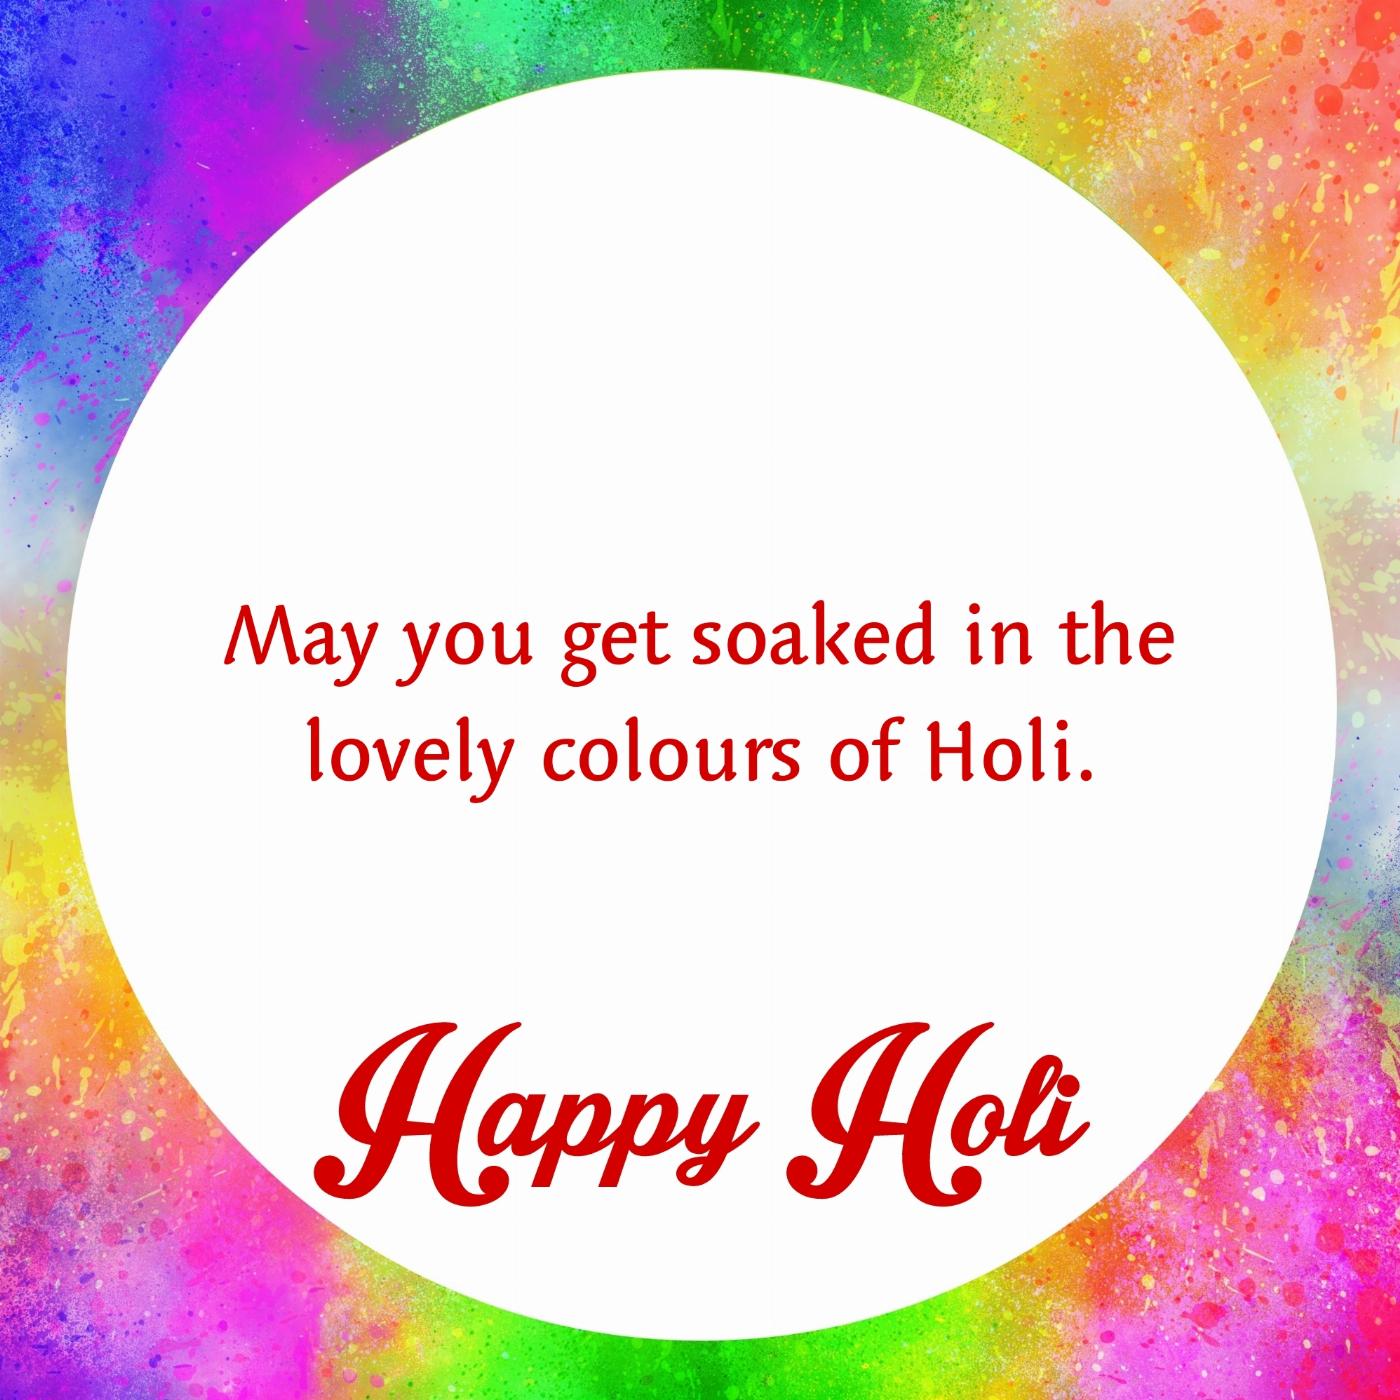 May you get soaked in the lovely colours of Holi